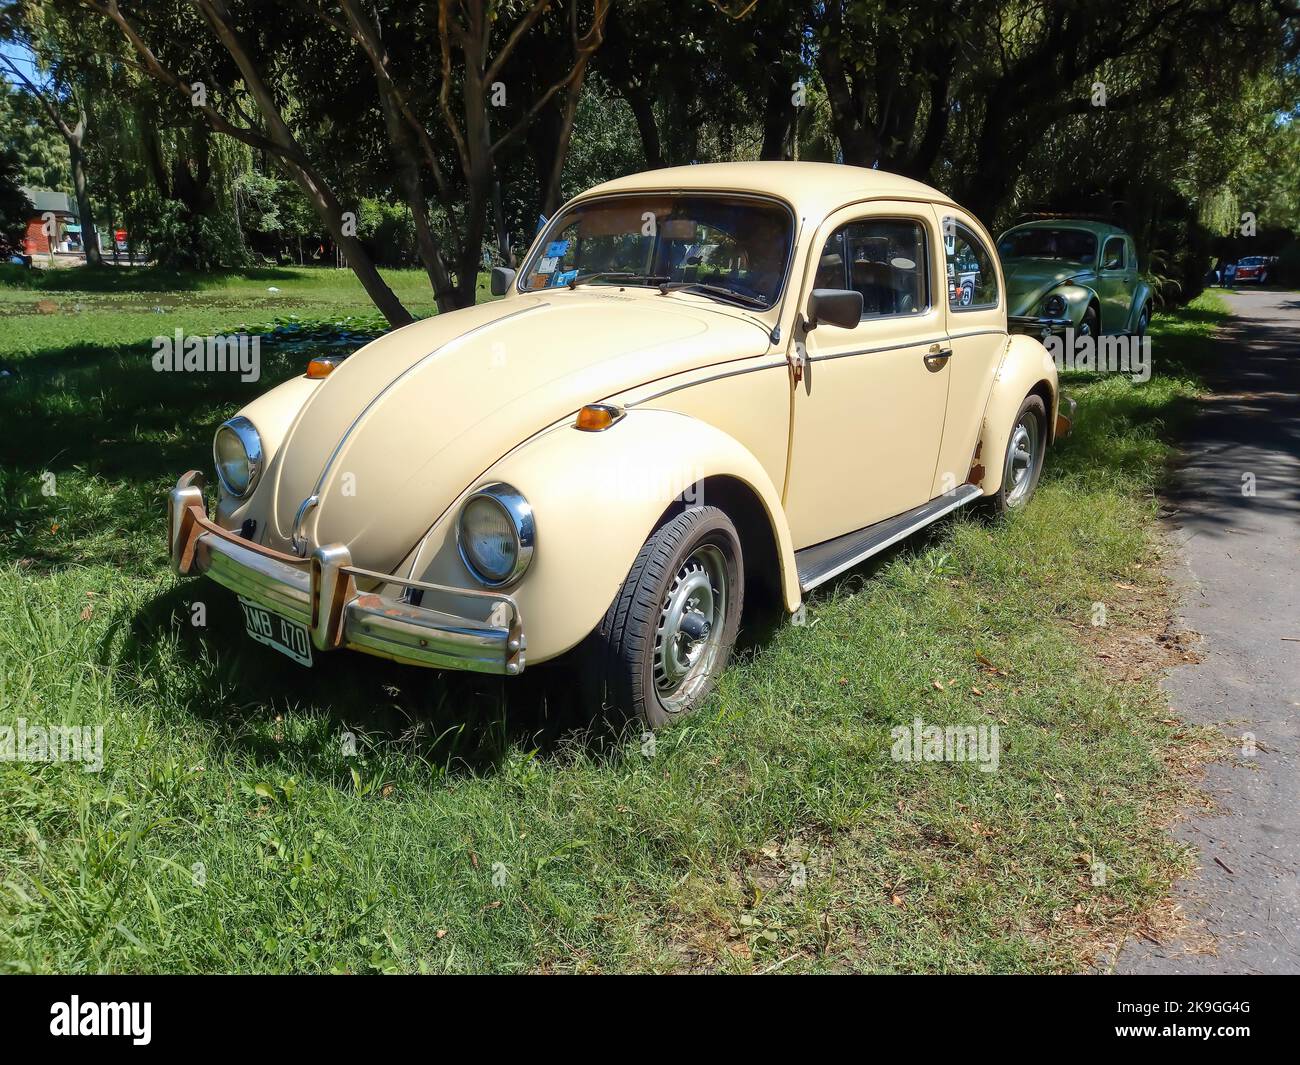 Escobar, Argentina - Mar 12, 2022: old Volkswagen Beetle Type 1 Bug. Grass and trees nature campsite background. Classic car show. Copyspace Stock Photo